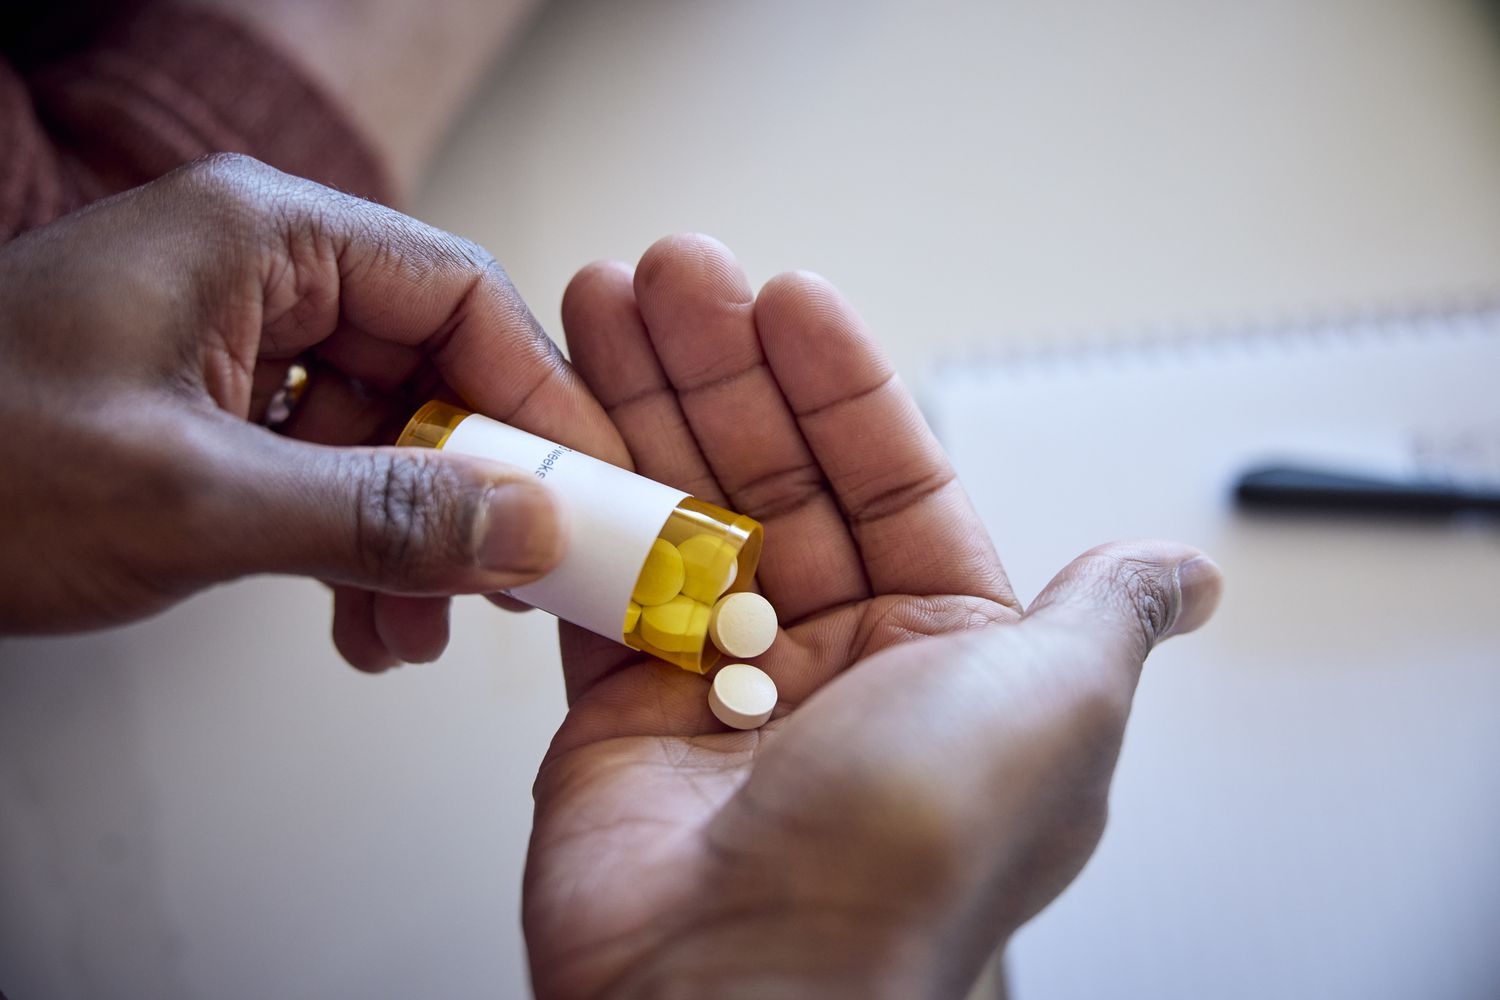 Antiretroviral drugs suppress HIV, but none of them clear the virus